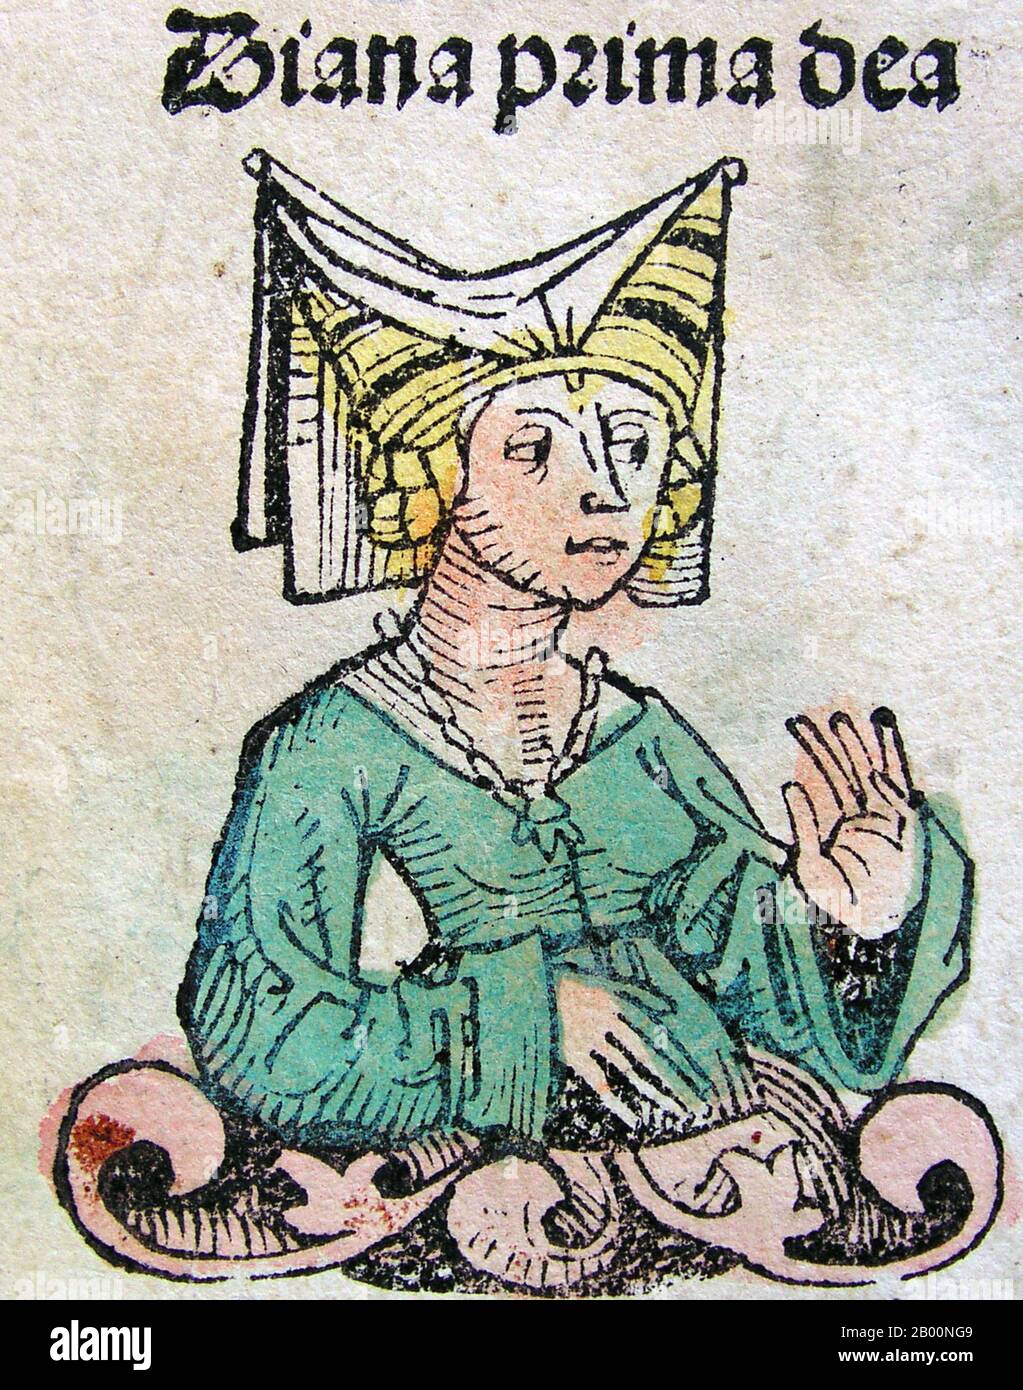 Germany: 'Diana'. The Nuremberg Chronicle, by Hartmann Schedel (1440-1514), 1493.  The Nuremberg Chronicle is an illustrated world history. Its structure follows the story of human history as related in the Bible, including the histories of a number of important Western cities. Written in Latin by Hartmann Schedel, with a version in German translation by Georg Alt, it appeared in 1493. It is one of the best-documented early printed books. It is classified as an incunabulum, a book, pamphlet, or broadside that was printed (not handwritten) before the year 1501 in Europe. Stock Photo